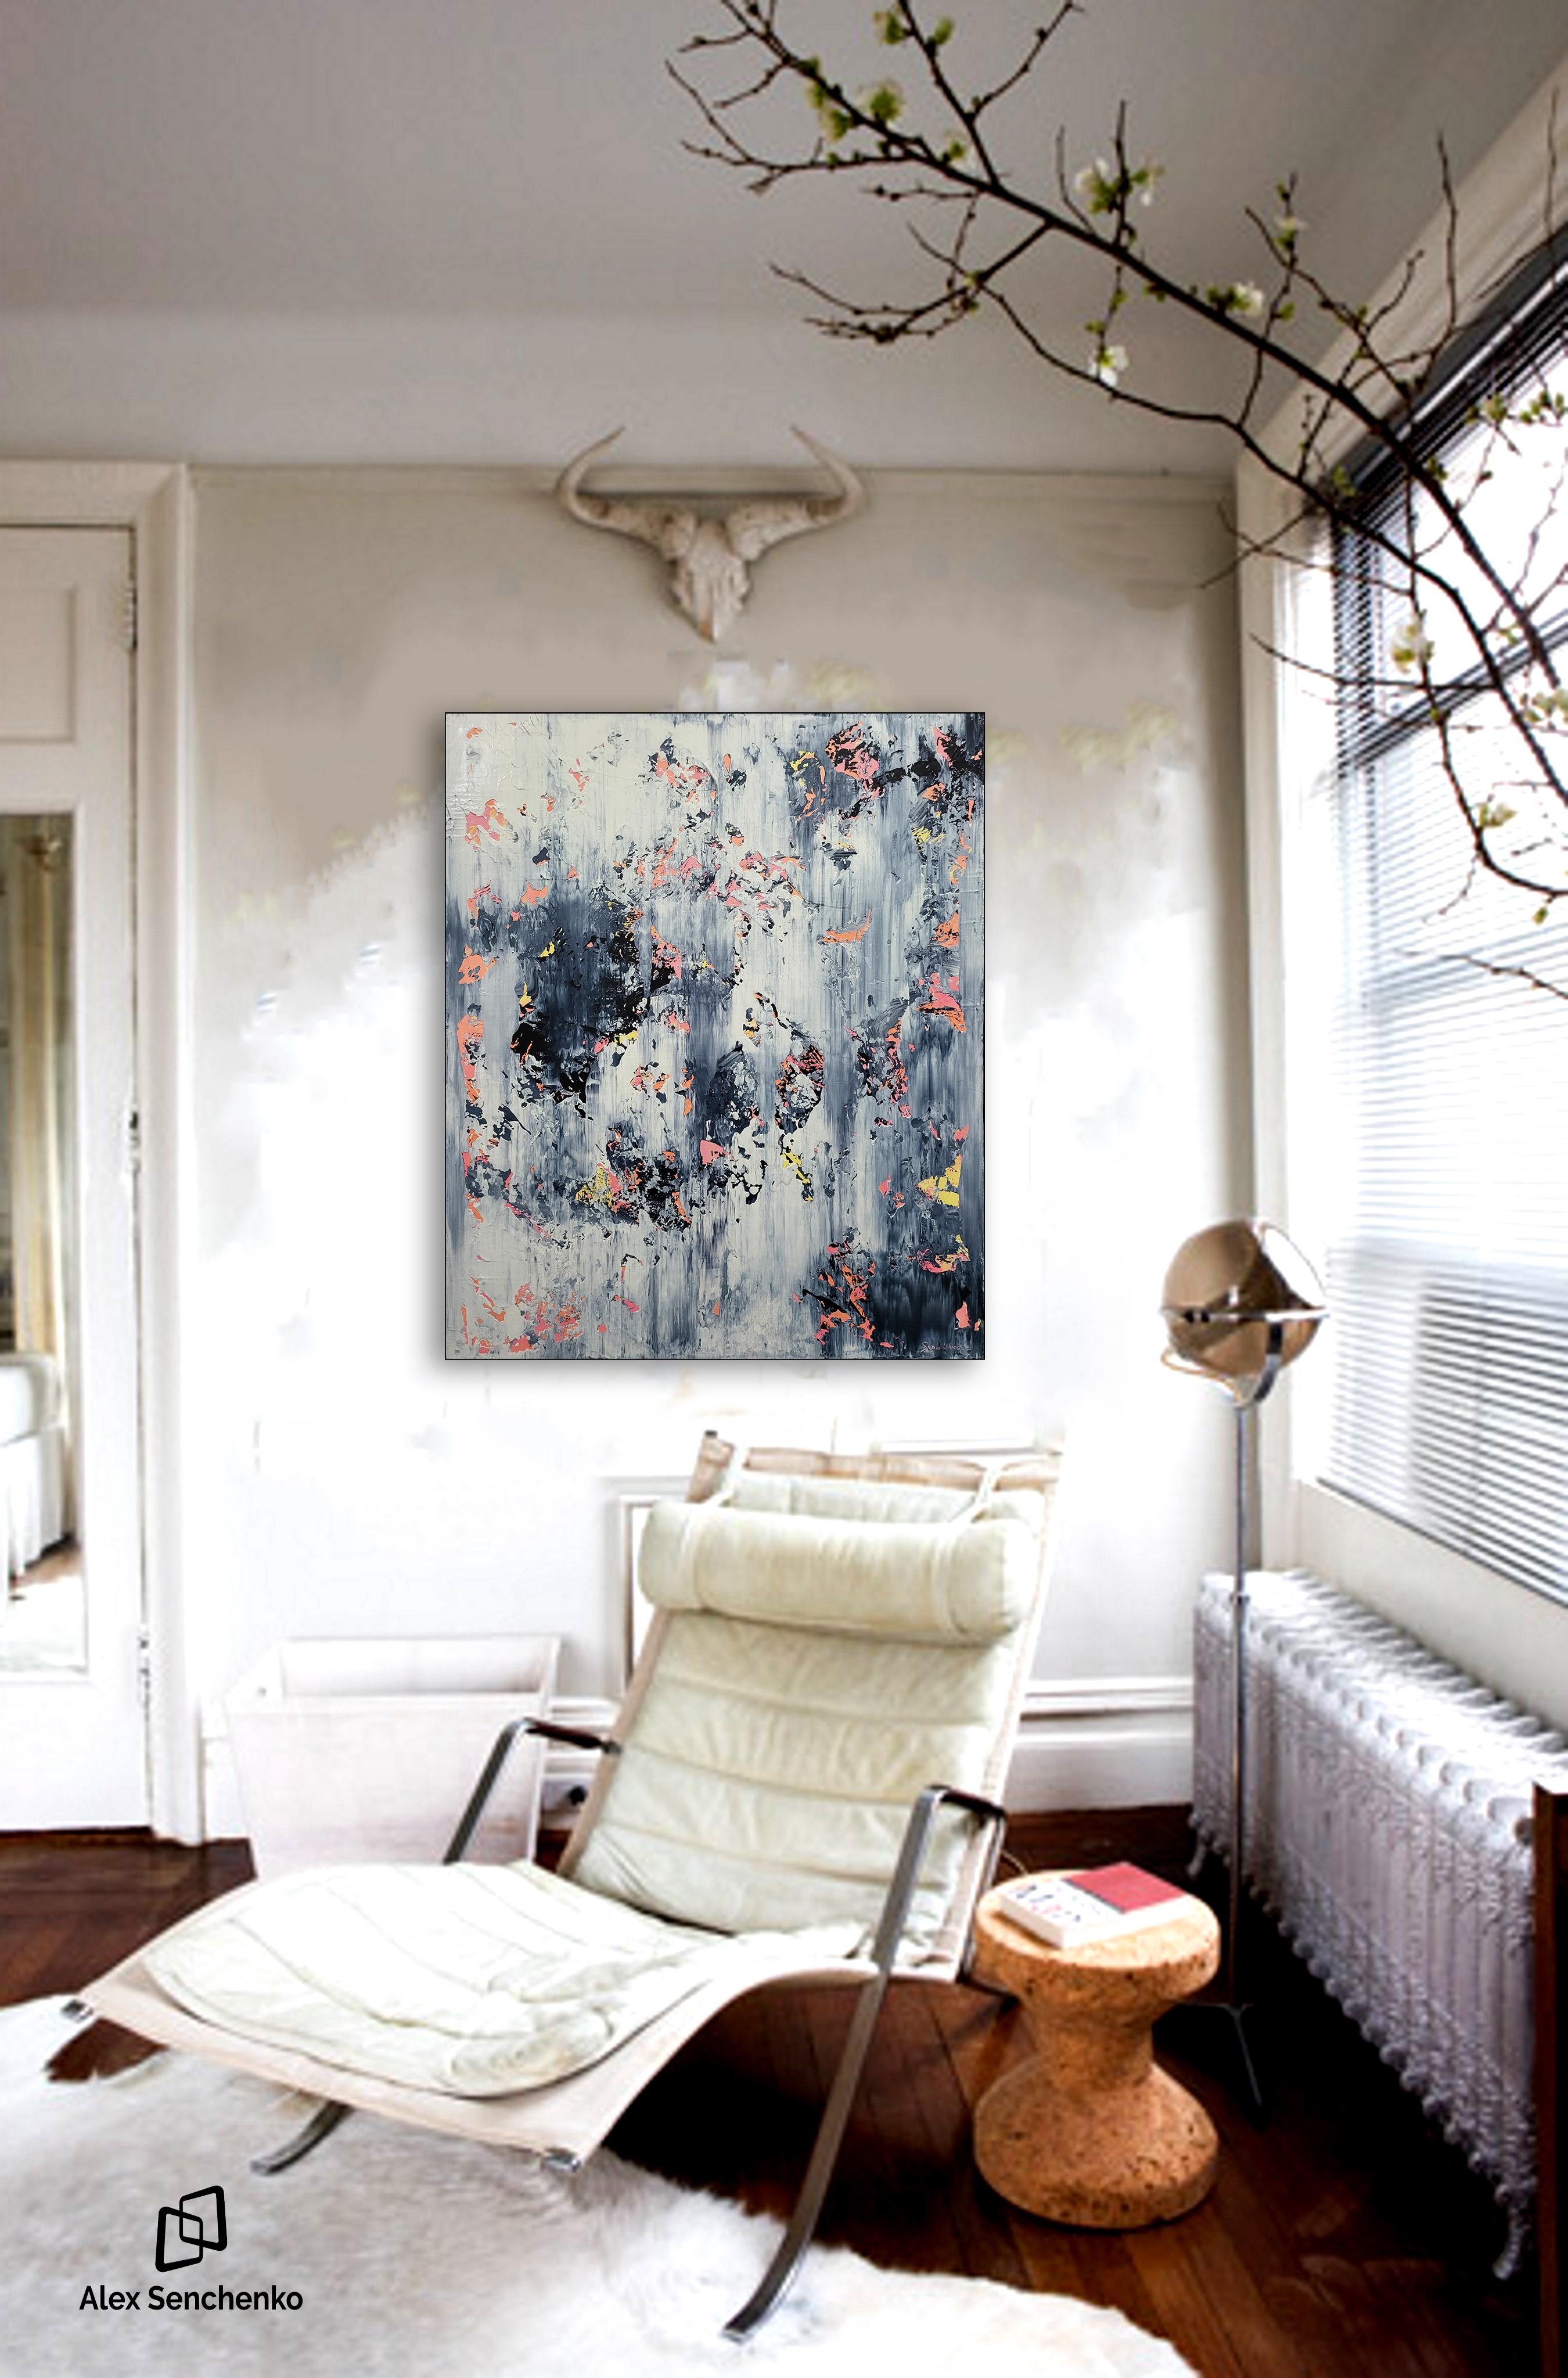 There’s something different about the homes of creative people. They like to surround themselves with inspiring things, from unique tablecloths to the incredible paintings on the walls.
Alex Senchenko’s - Abstract 22163 - can give your home that